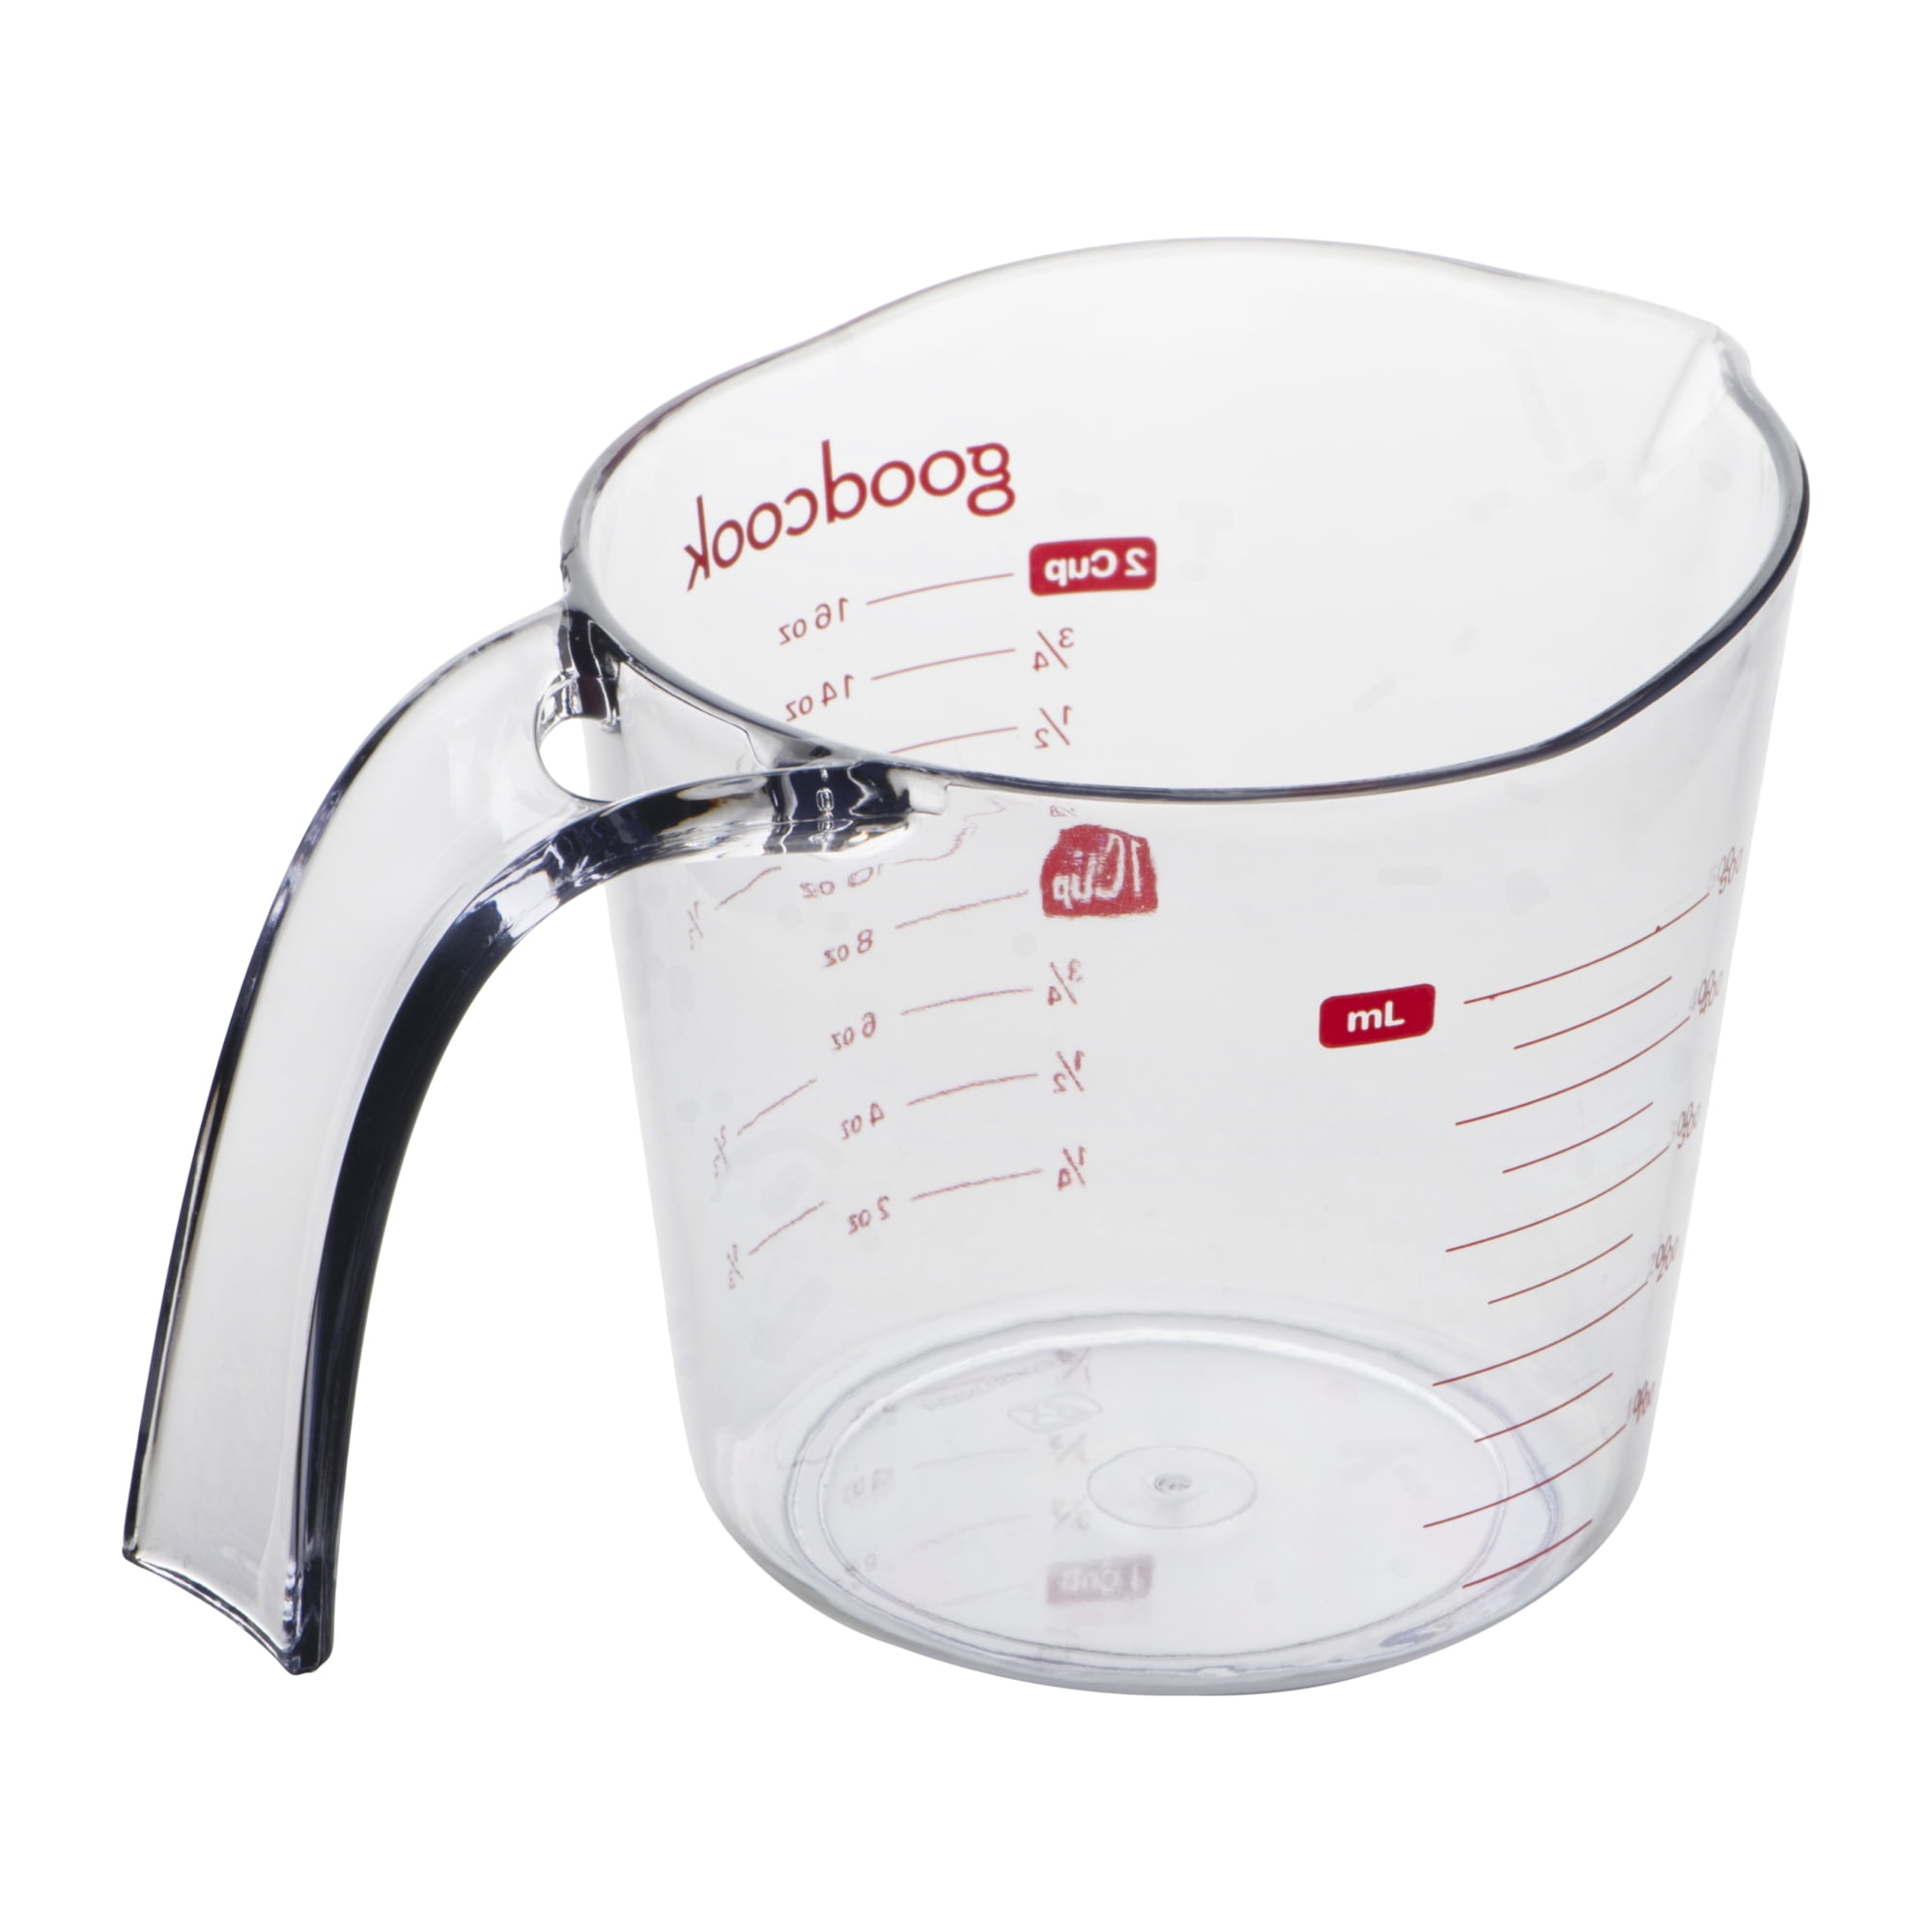 GoodCook Everyday Glass Liquid Measuring Cup, 1 Cup - GoodCook